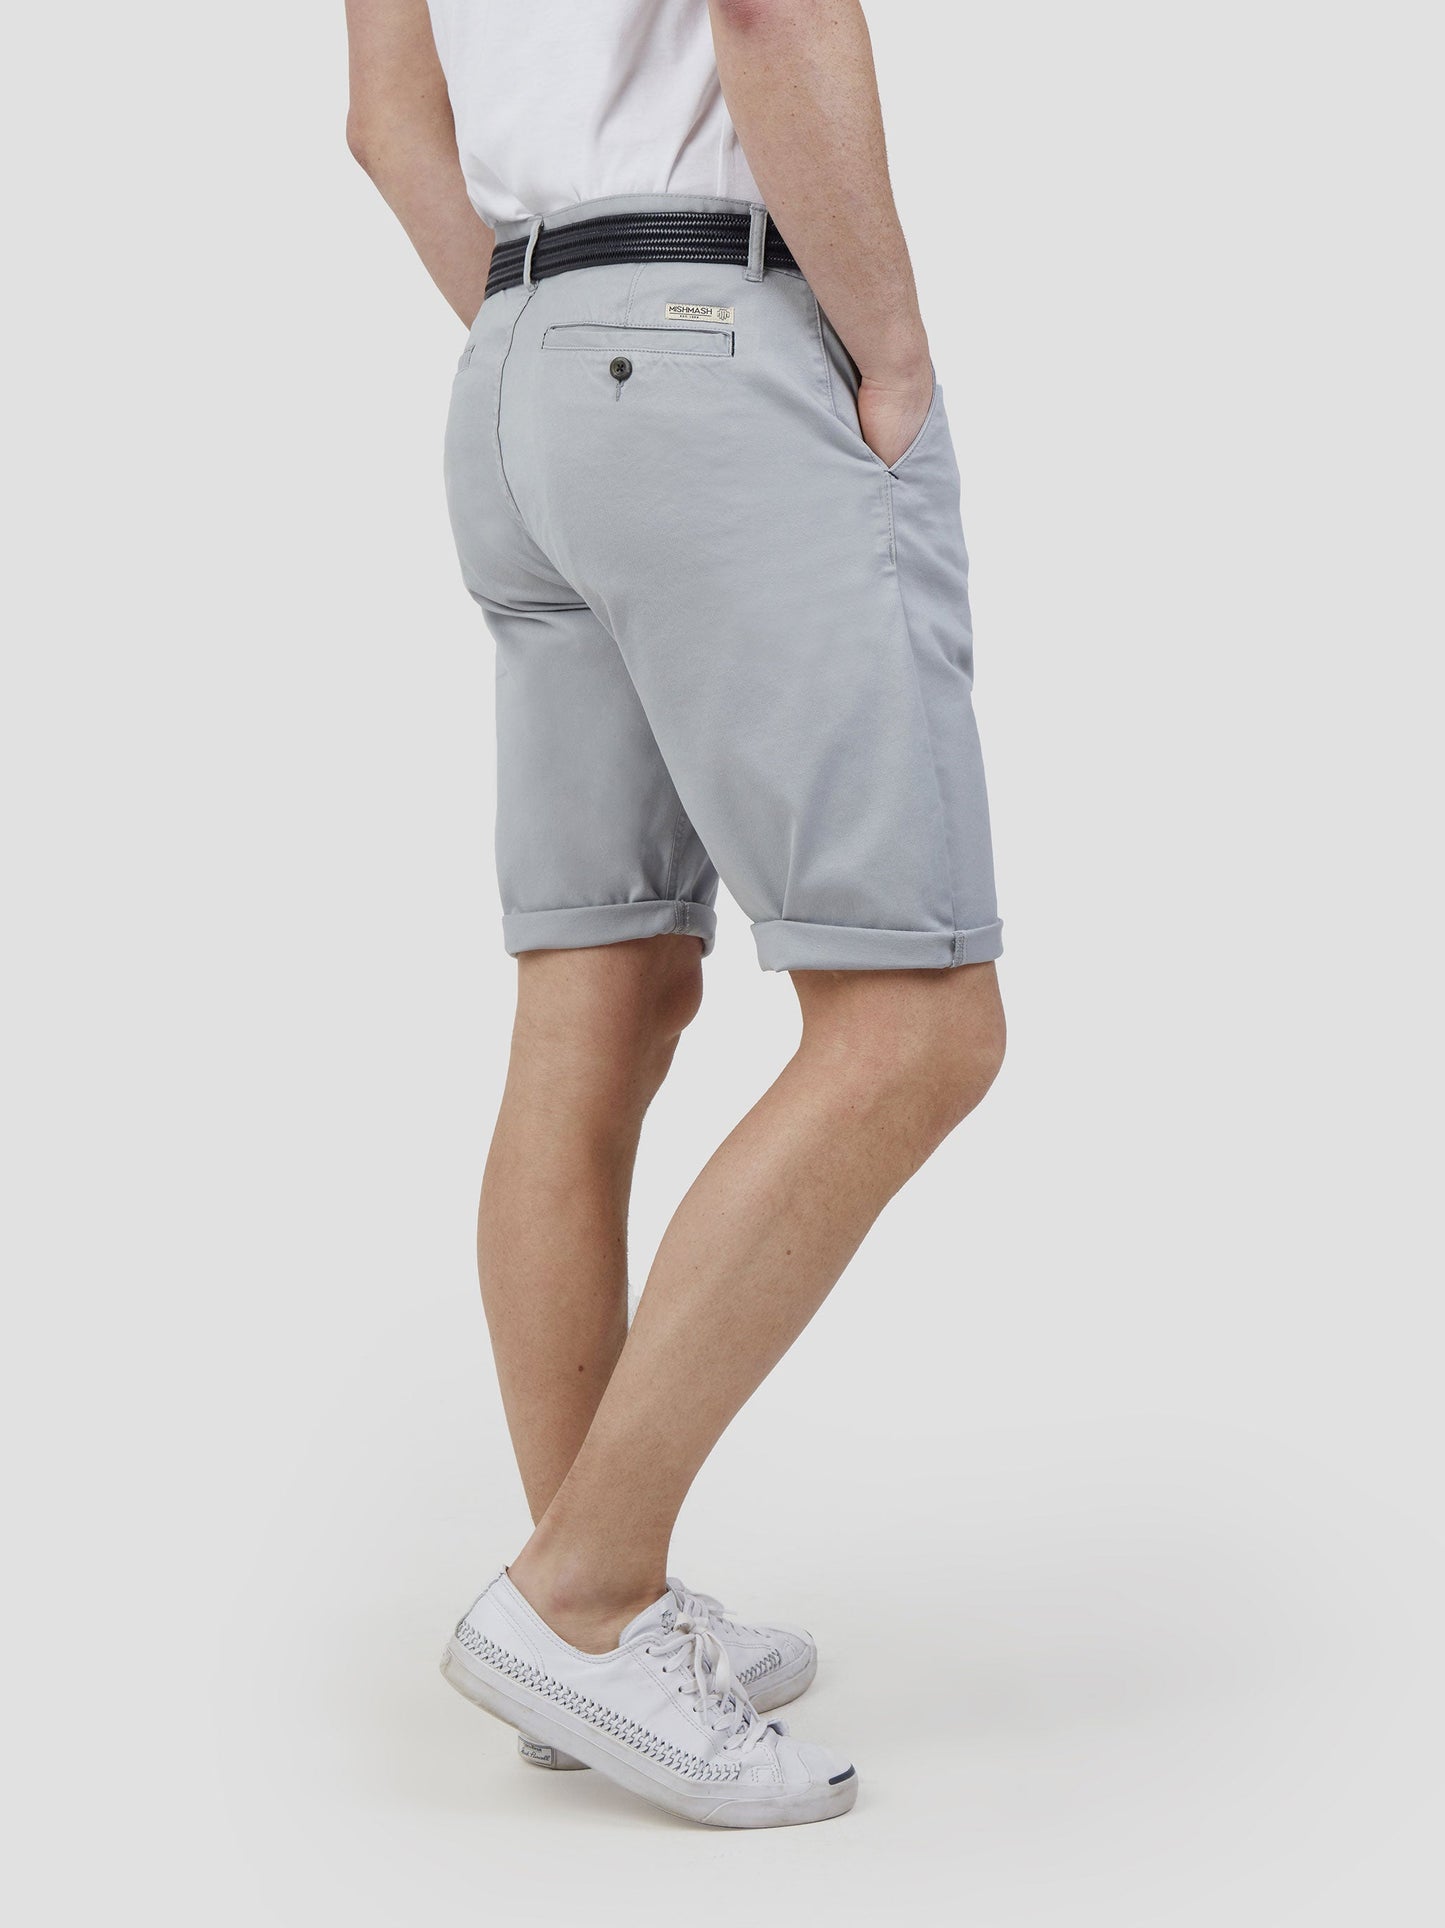 Regular fit mens classic chino shorts for summer cotton grey stretch mish mash jeans